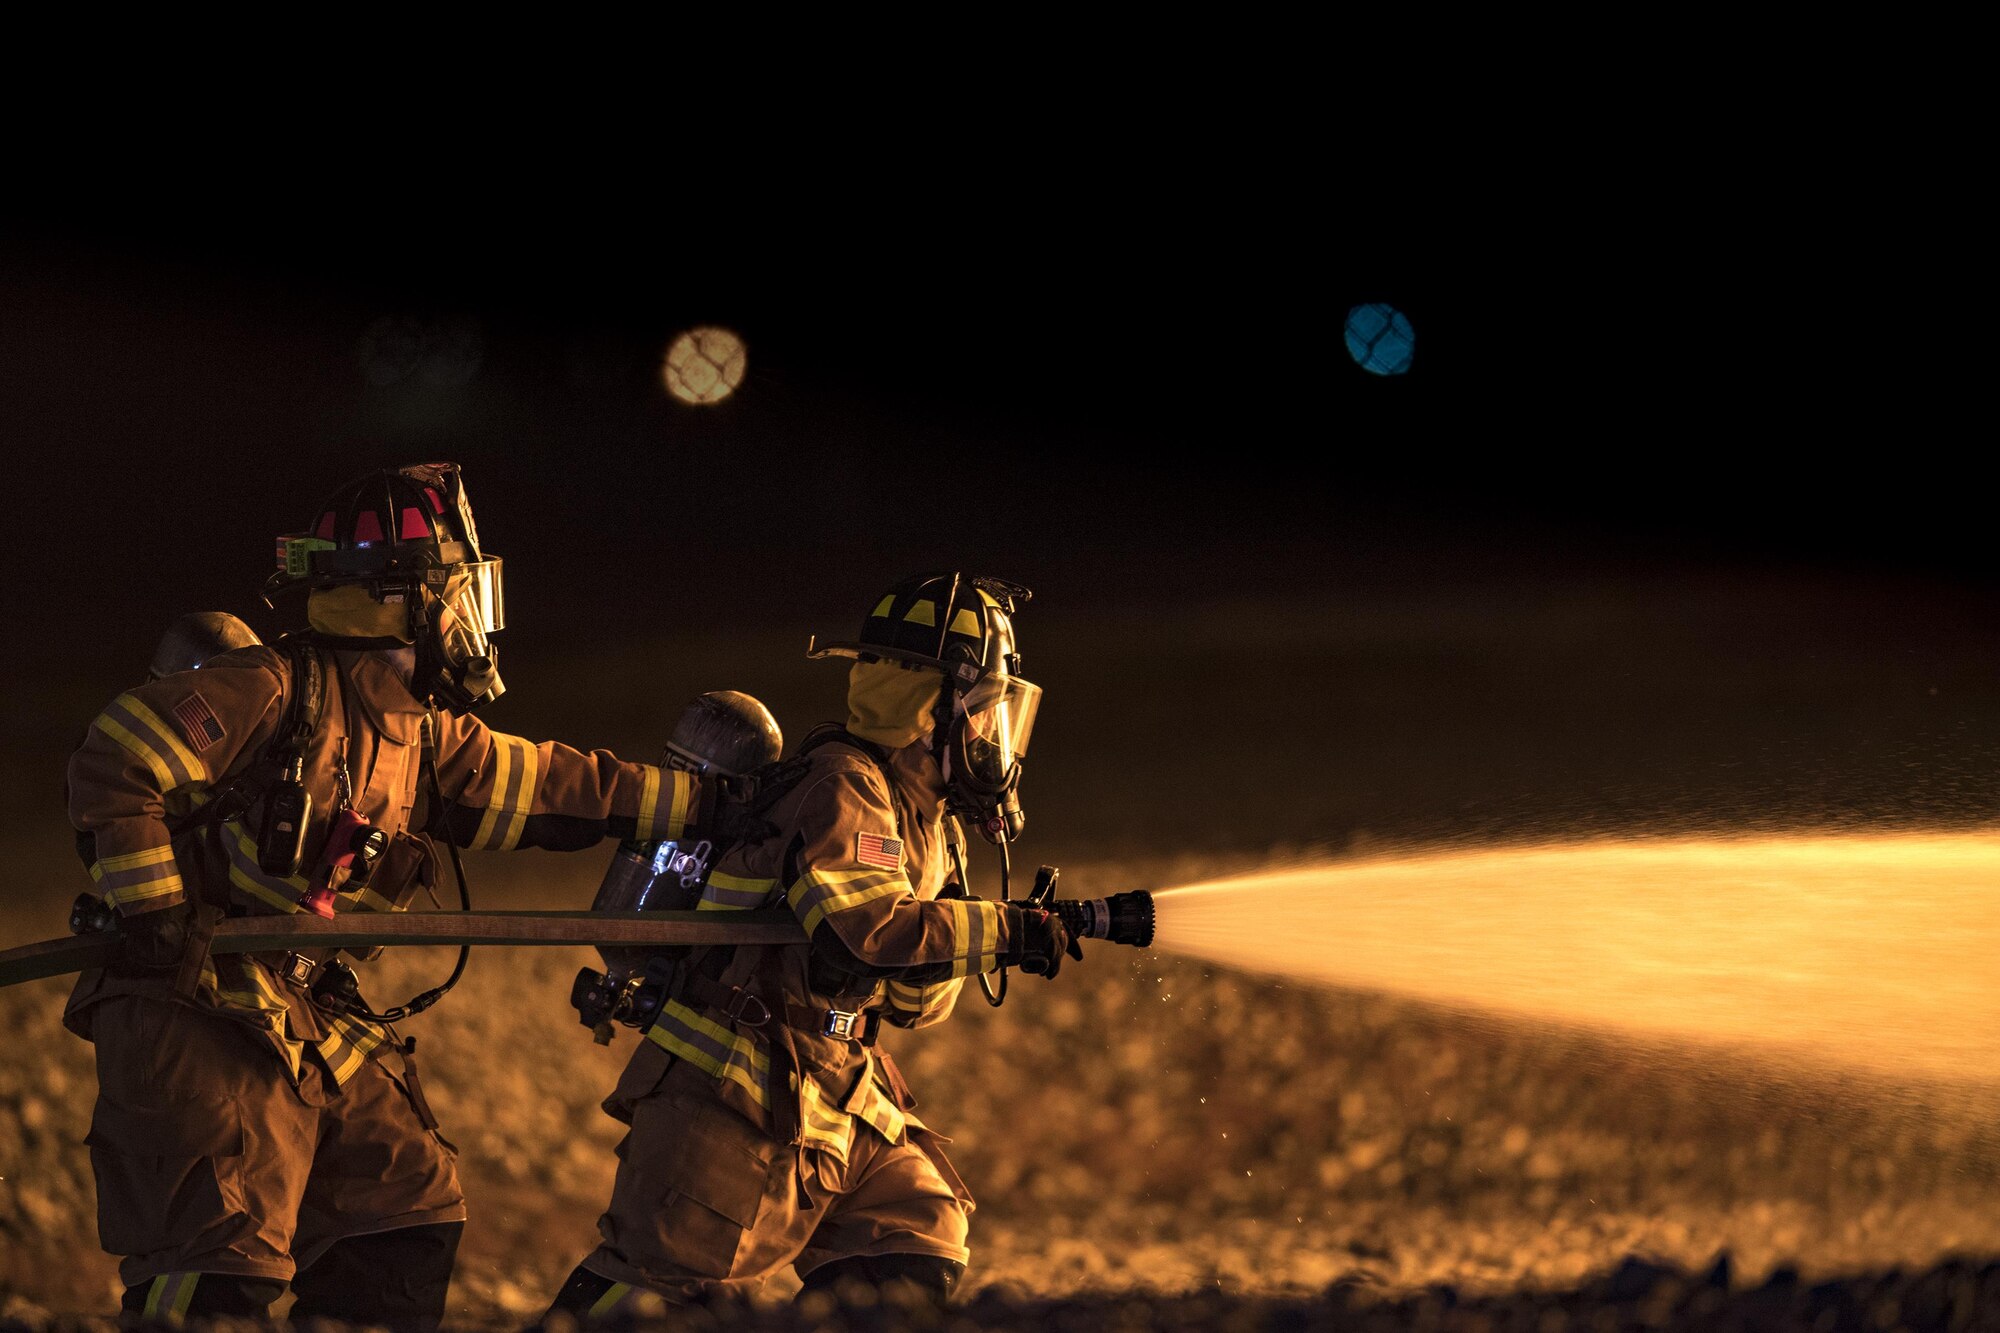 Firefighters from the 23d Civil Engineer Squadron advance towards a fire during nighttime, live-fire training, Jan. 10, 2017, at Moody Air Force Base, Ga. This training is an annual requirement for Moody firefighters and is just one of the ways they stay ready to protect people, property and the environment from fires and disasters. (U.S. Air Force photo by Staff Sgt. Ryan Callaghan)
